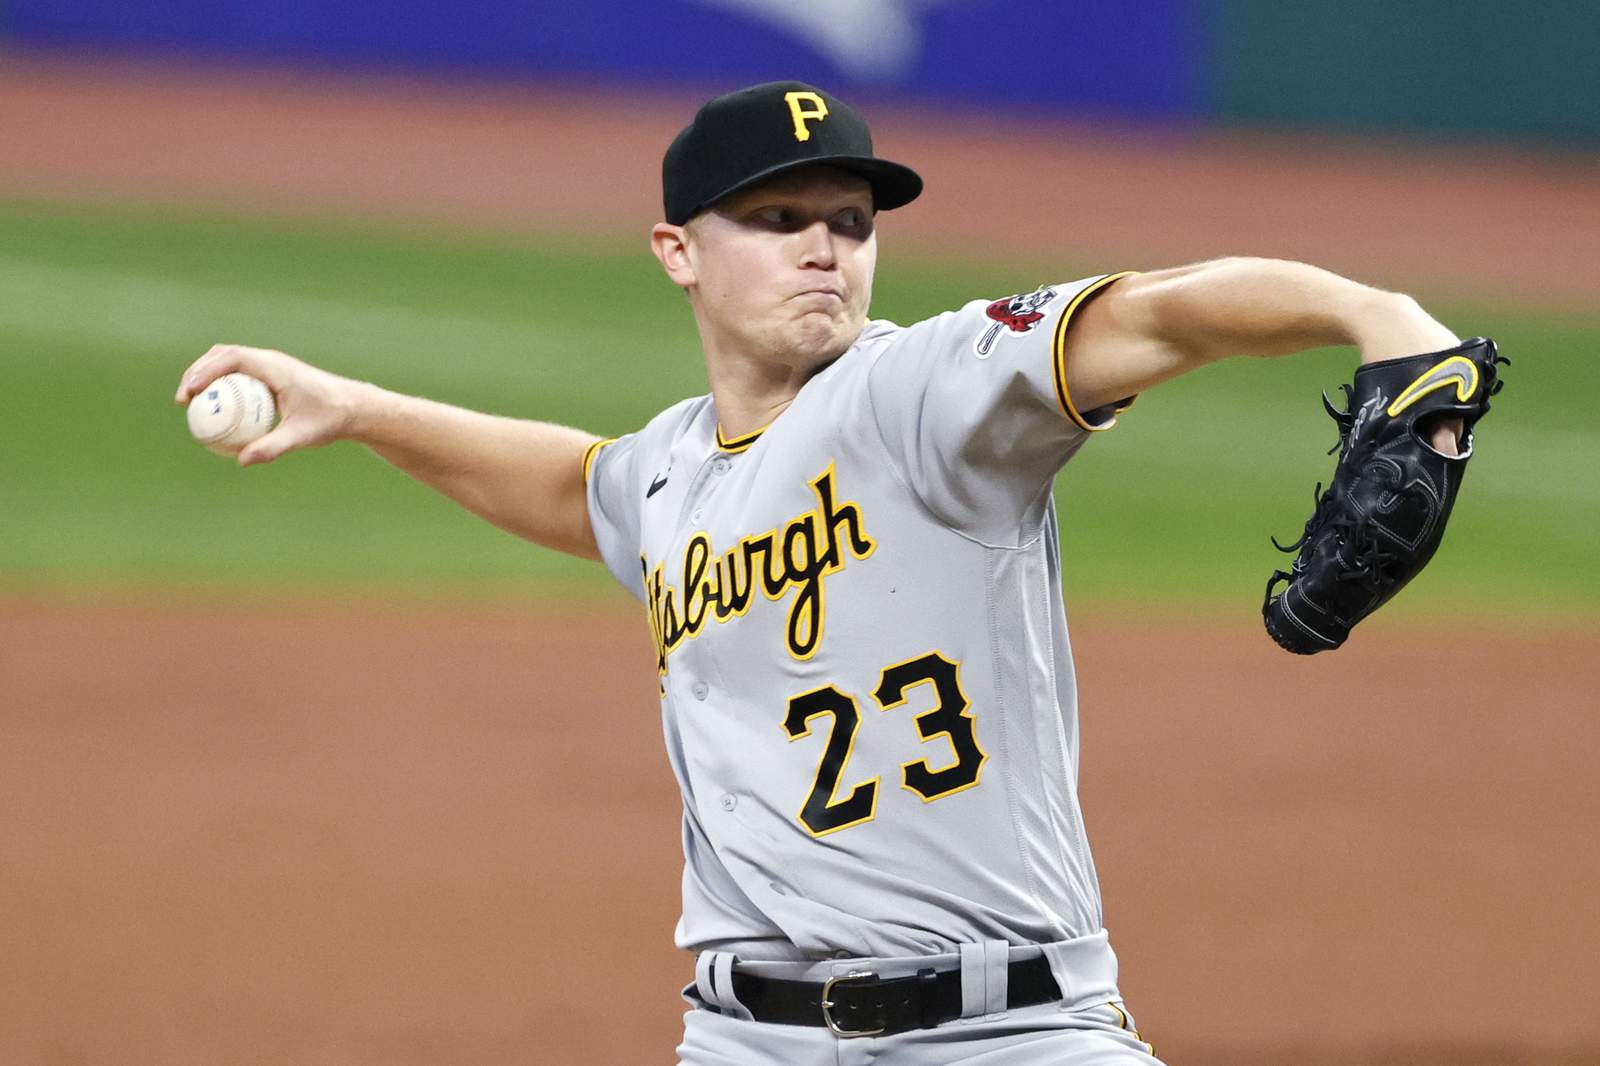 Pirates' Keller pulled 5 no-hit innings, Indians bunt in 7th